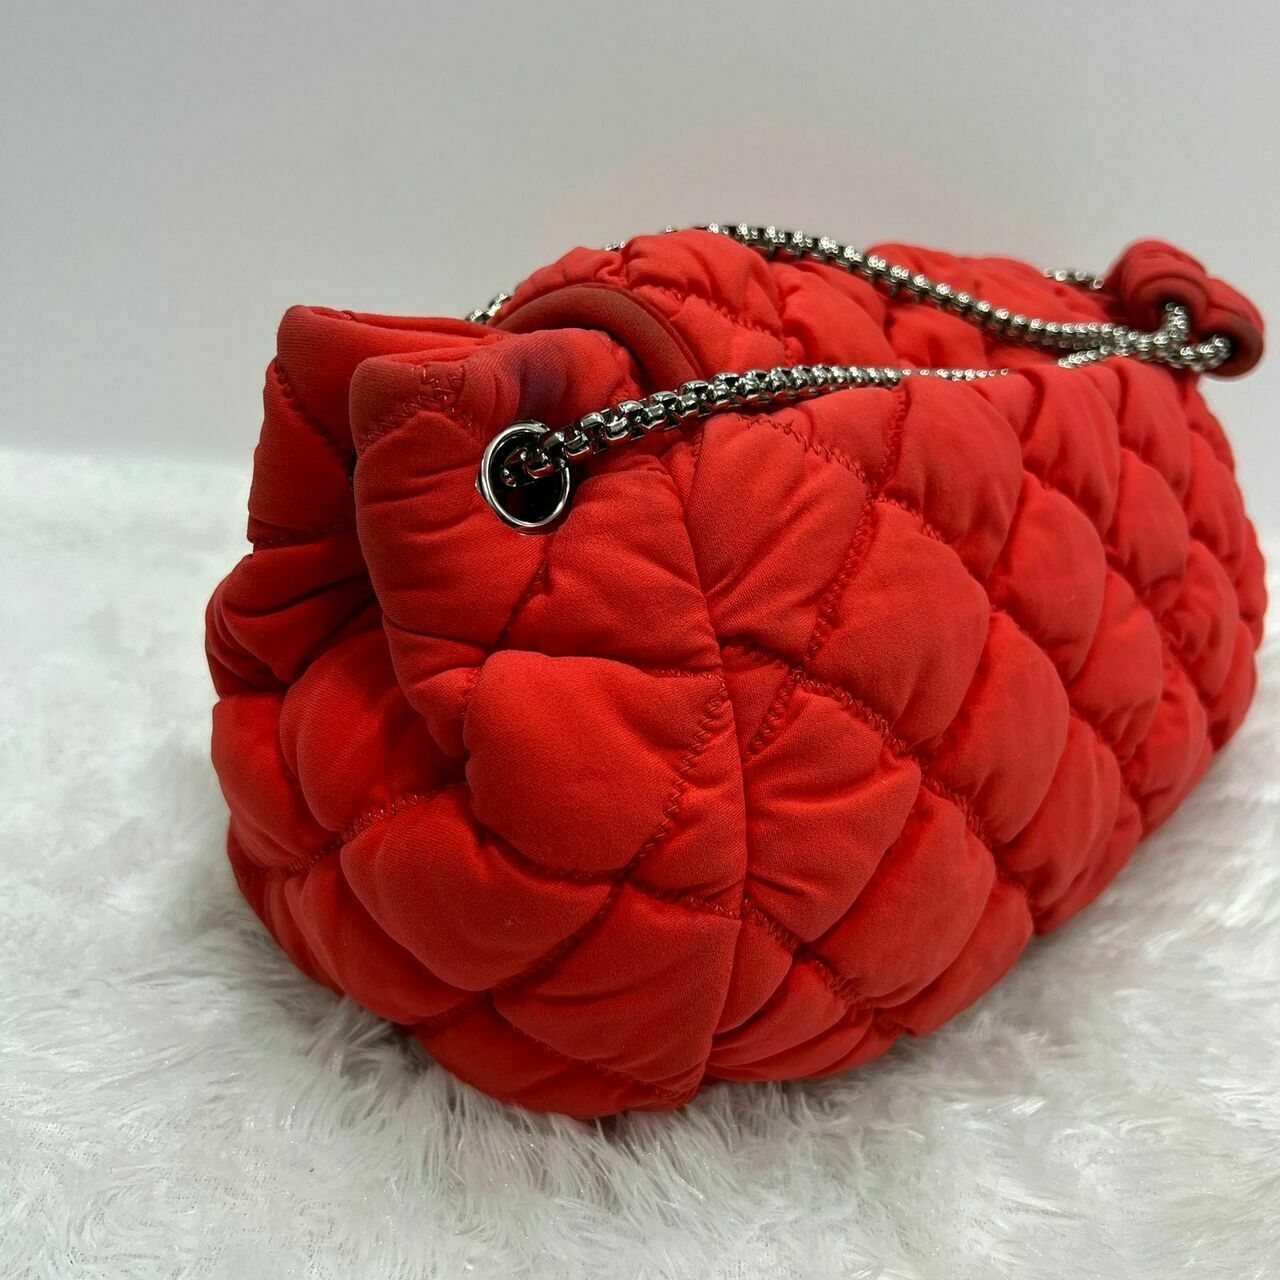 Chanel Red Bubble Accordion Quilted Nylon Flap Bag SHW #12 Shoulder Bag